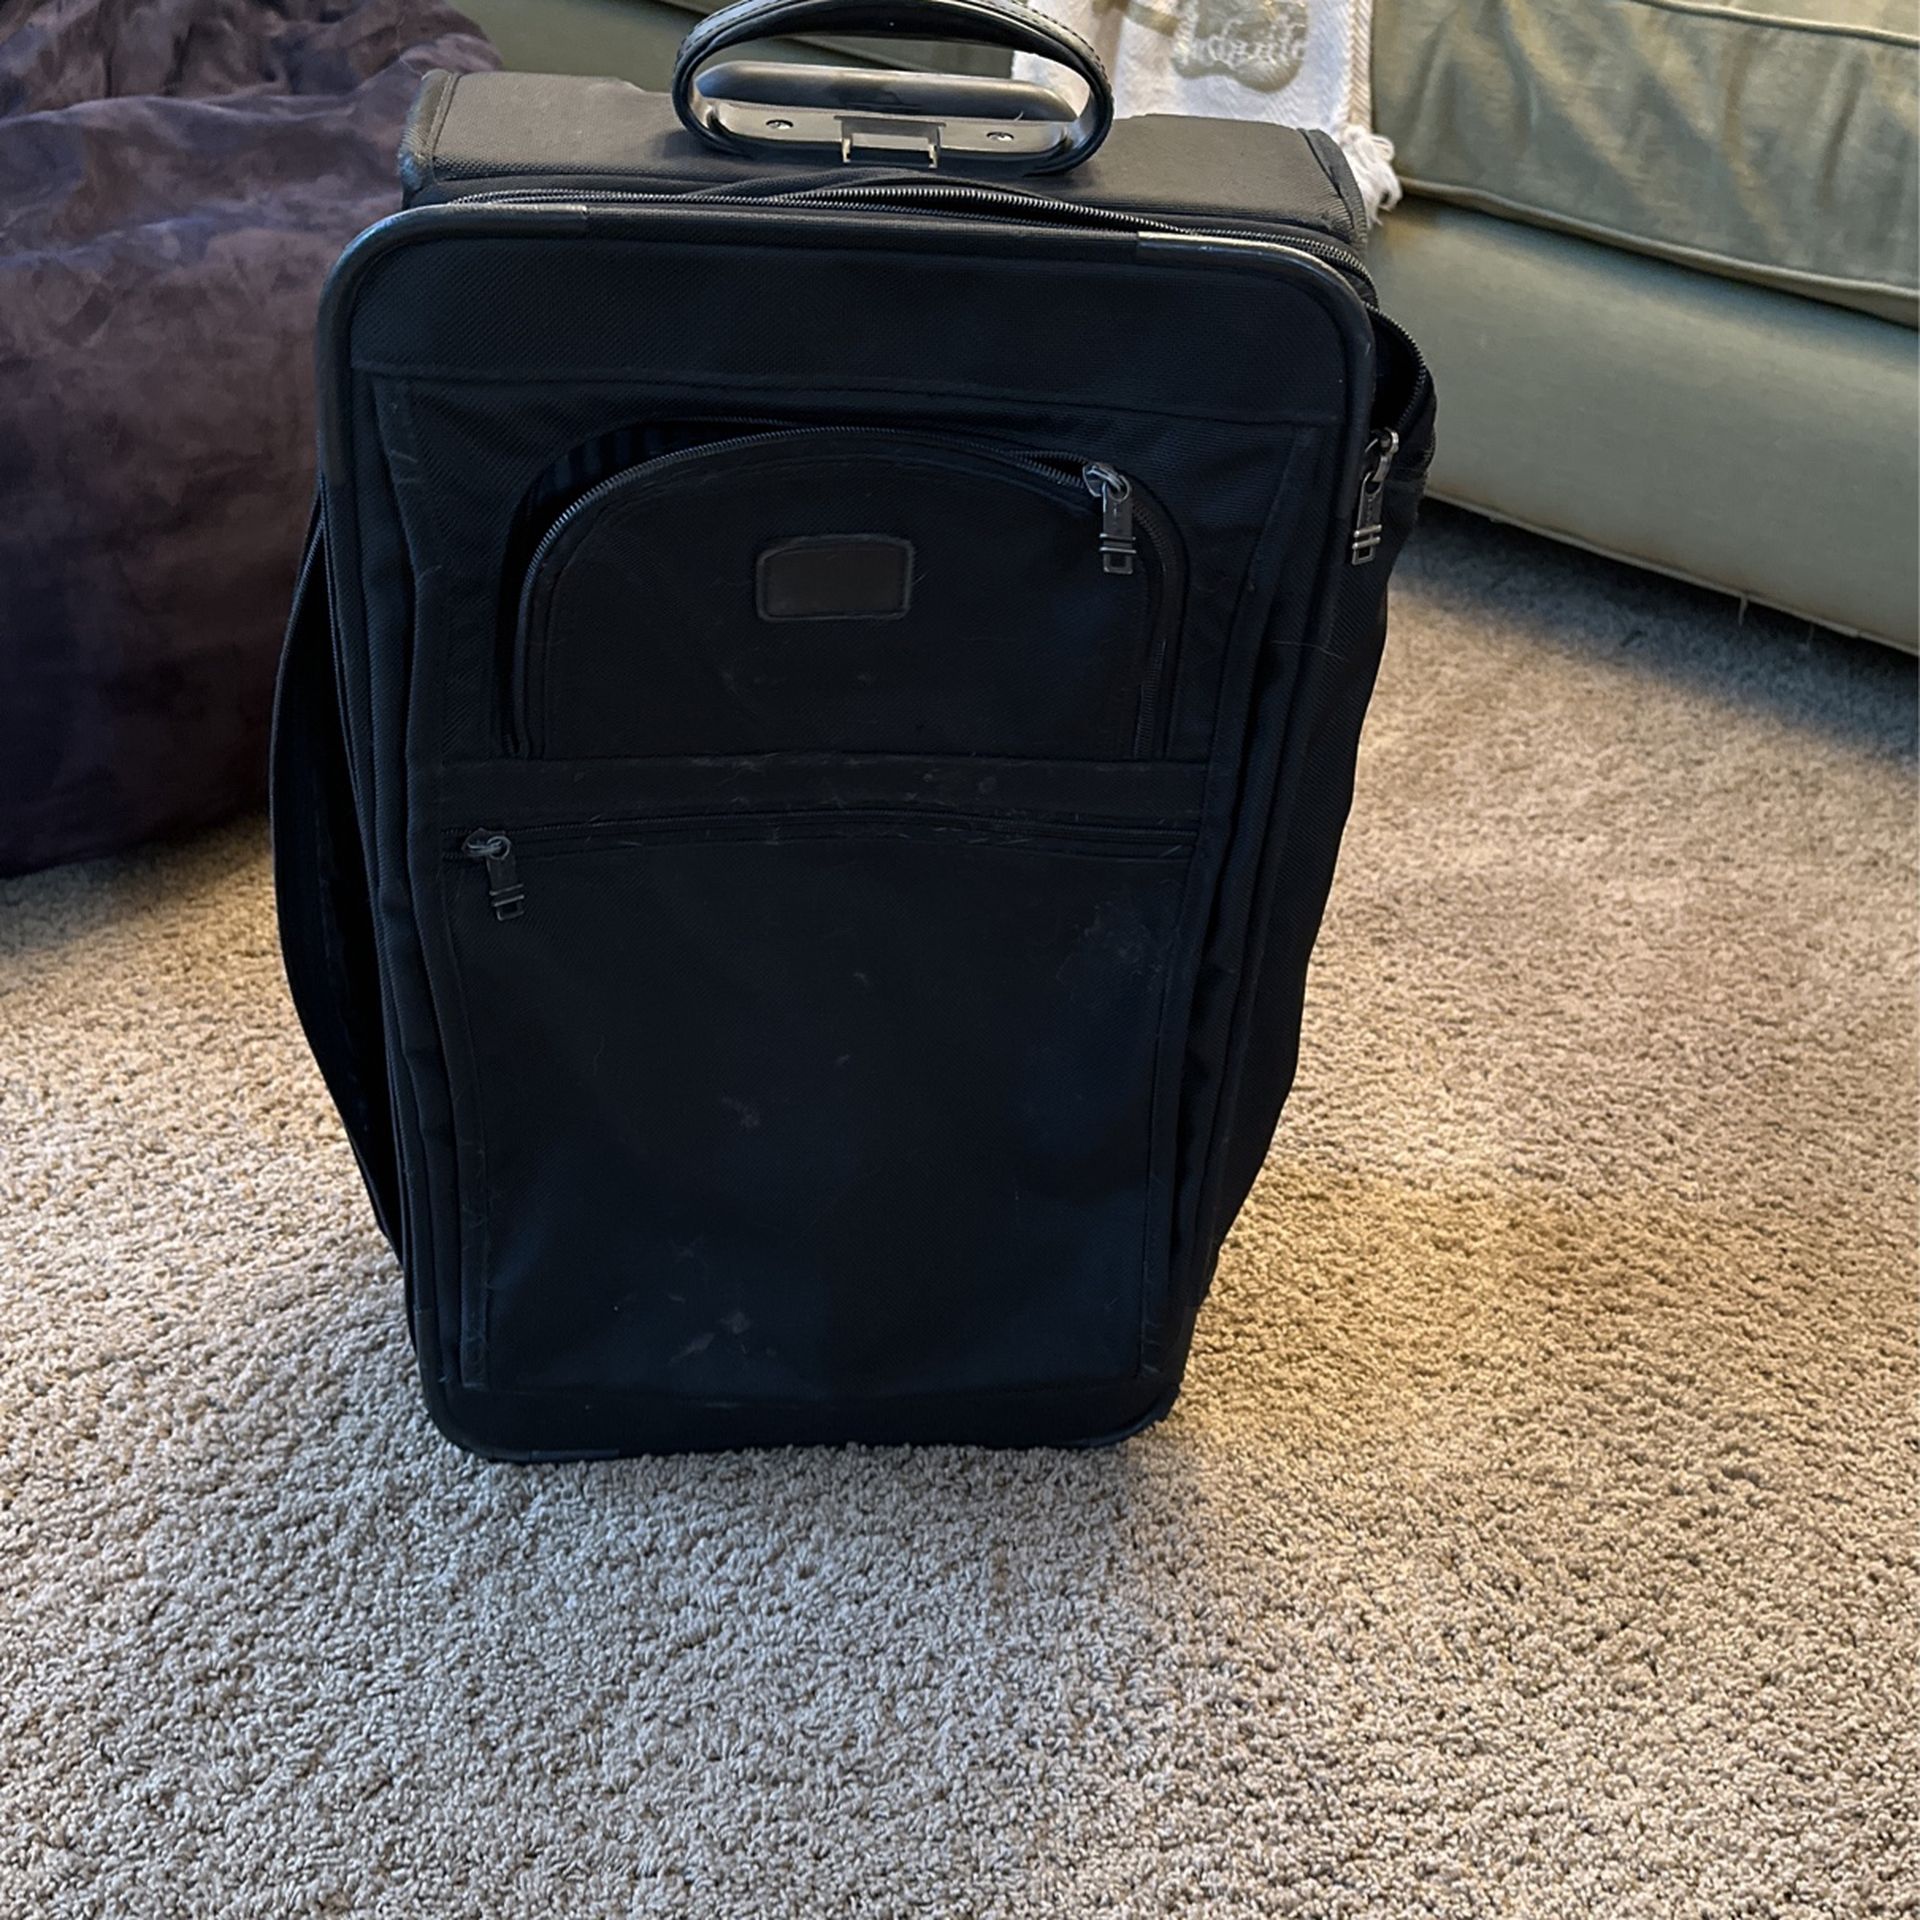 Tumi 2 Wheel Carry On Expandable Suitcase for Sale in Snohomish, WA ...